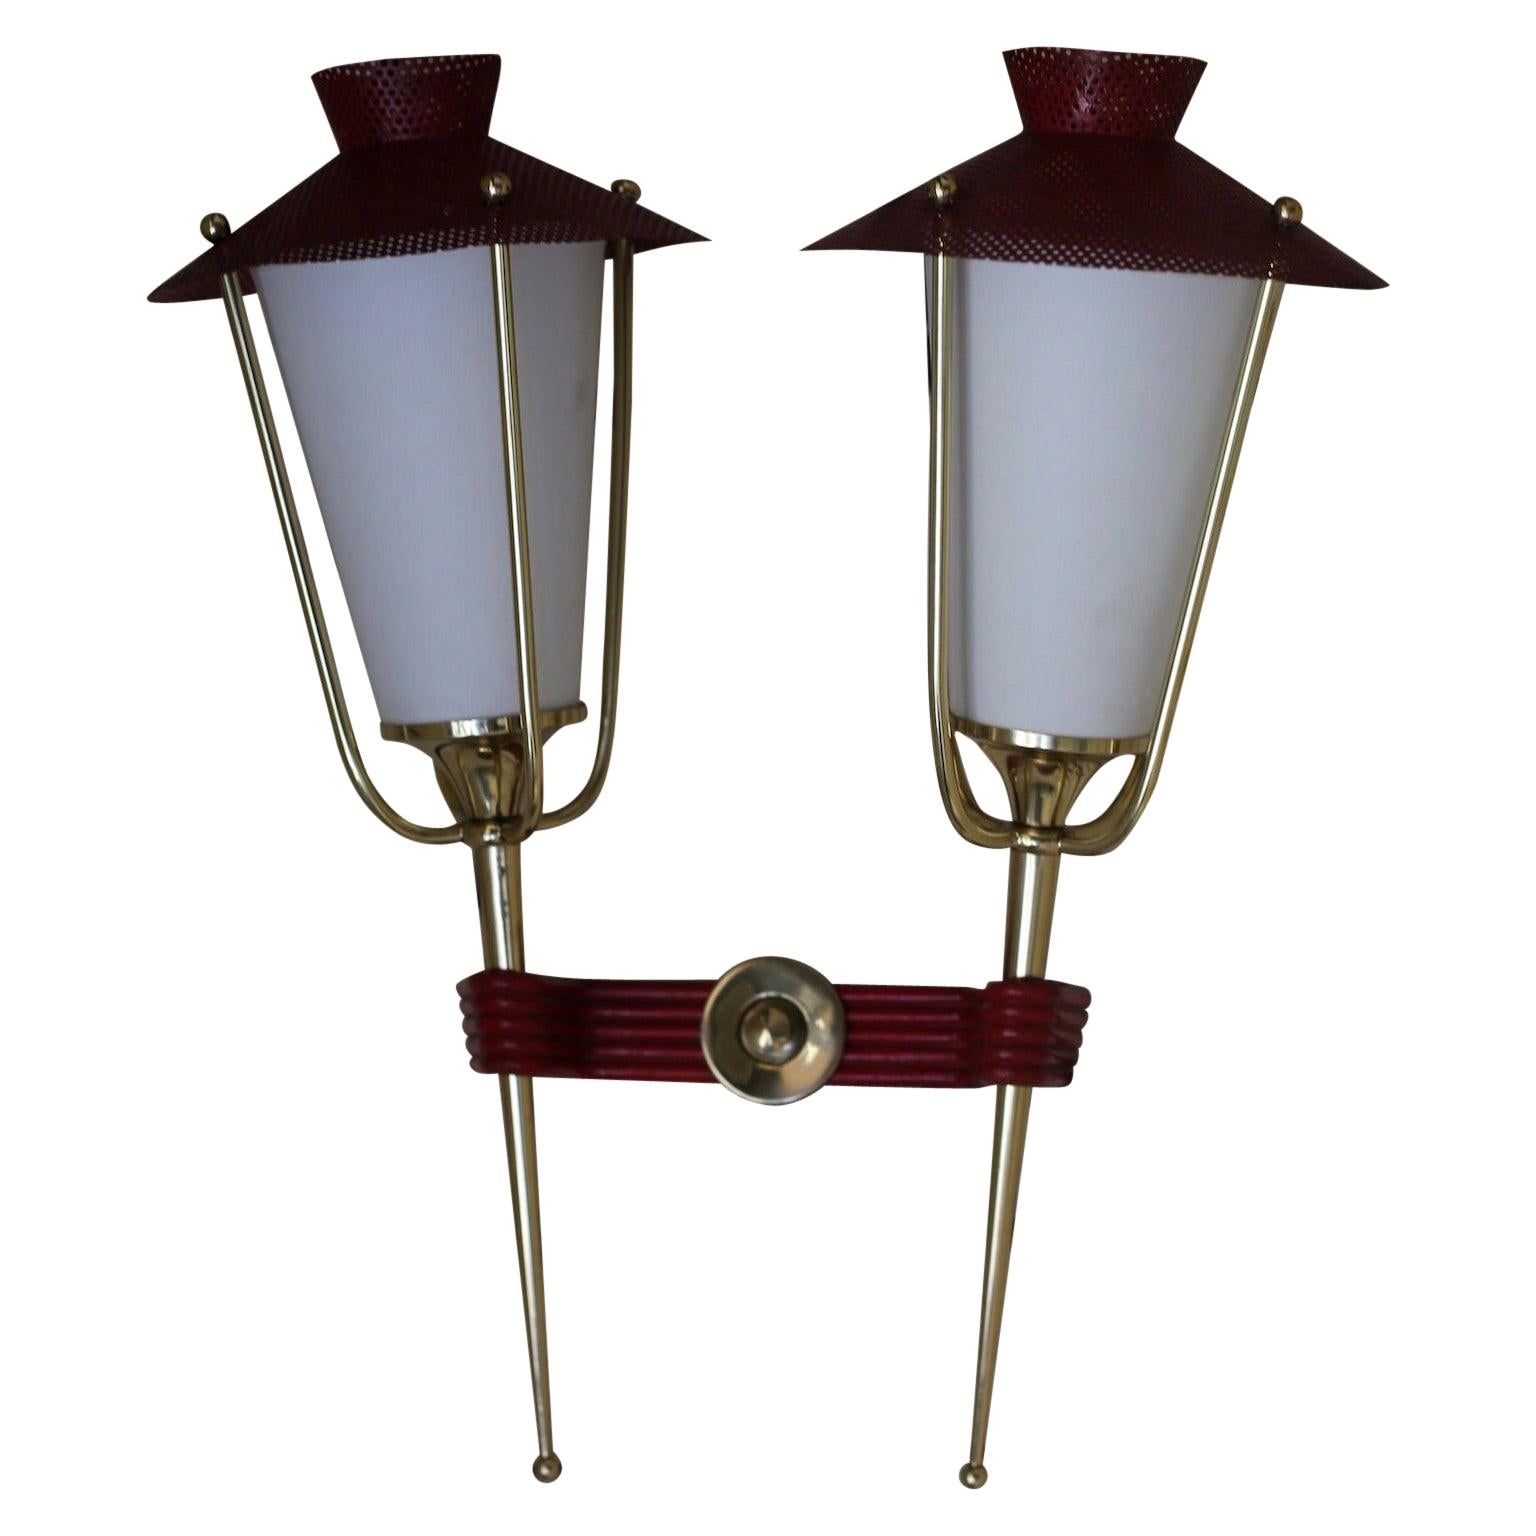 Midcentury French Red and Brass Wall Sconces by Maison Arlus For Sale